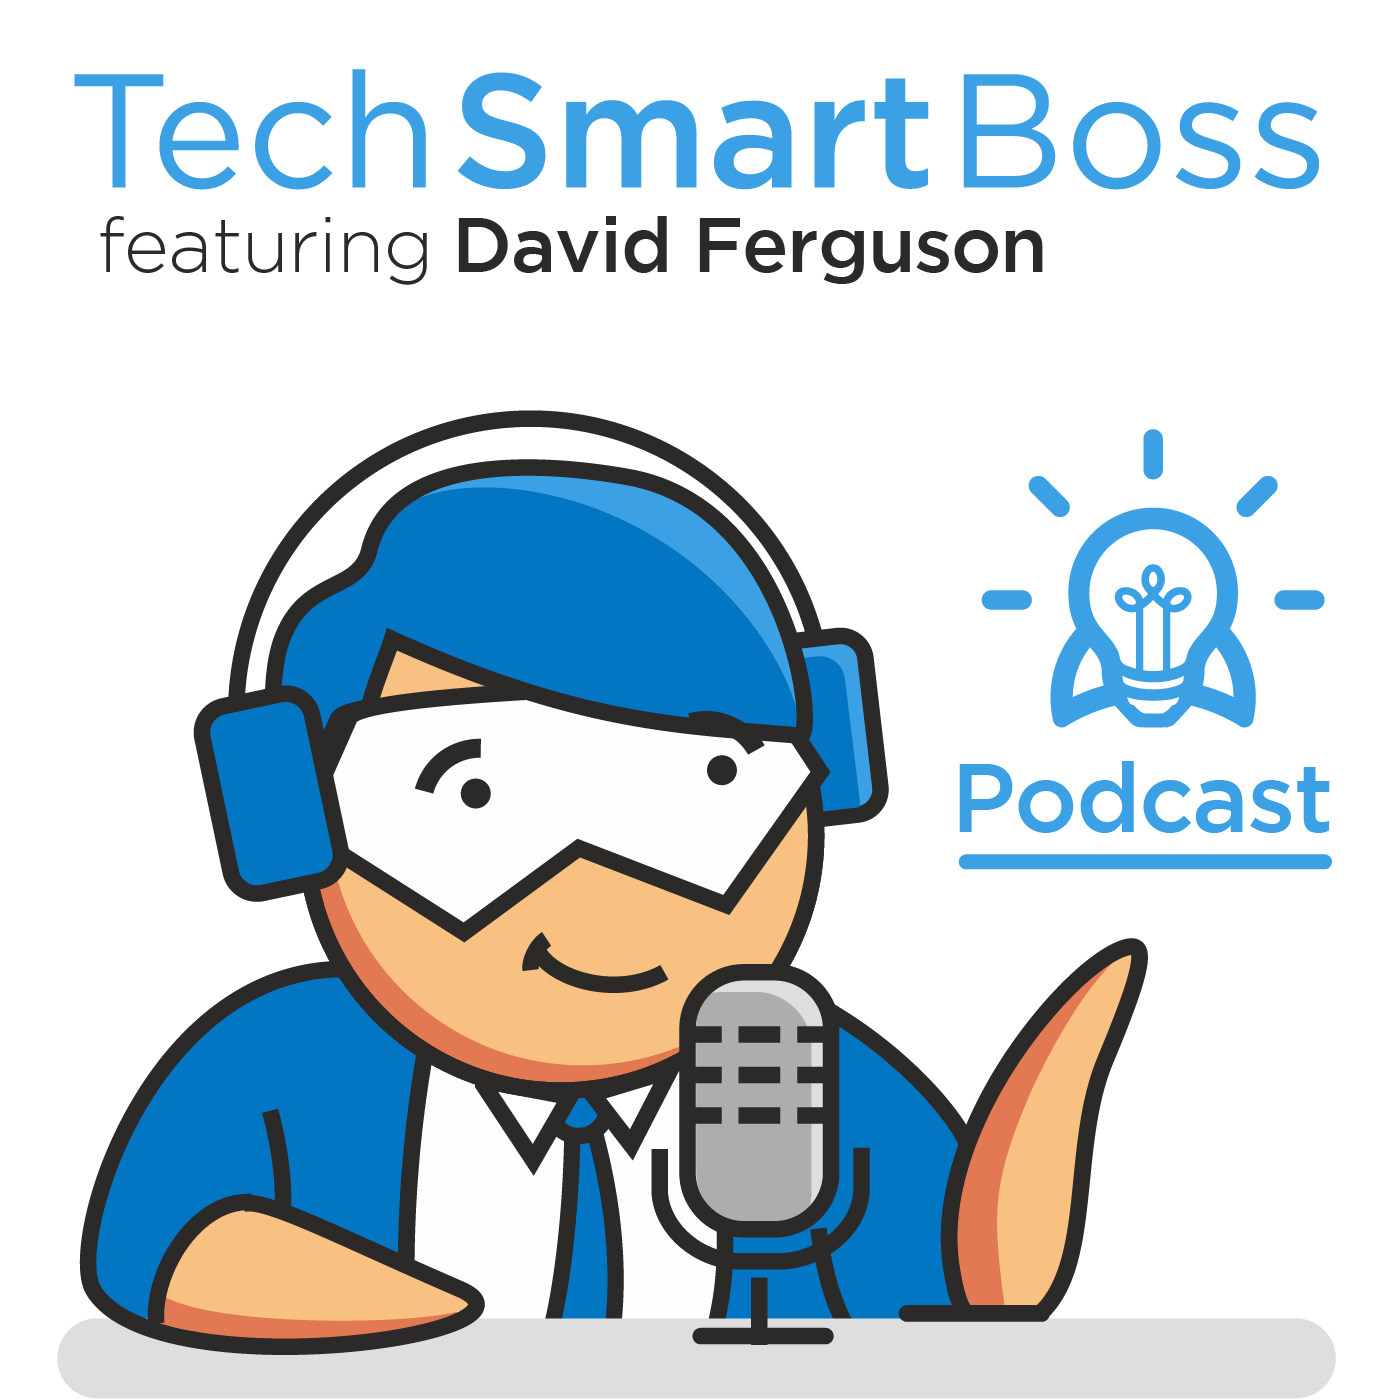 Episode 64: How to Leverage Video Marketing in Your Business (The Tech Smart Boss Way